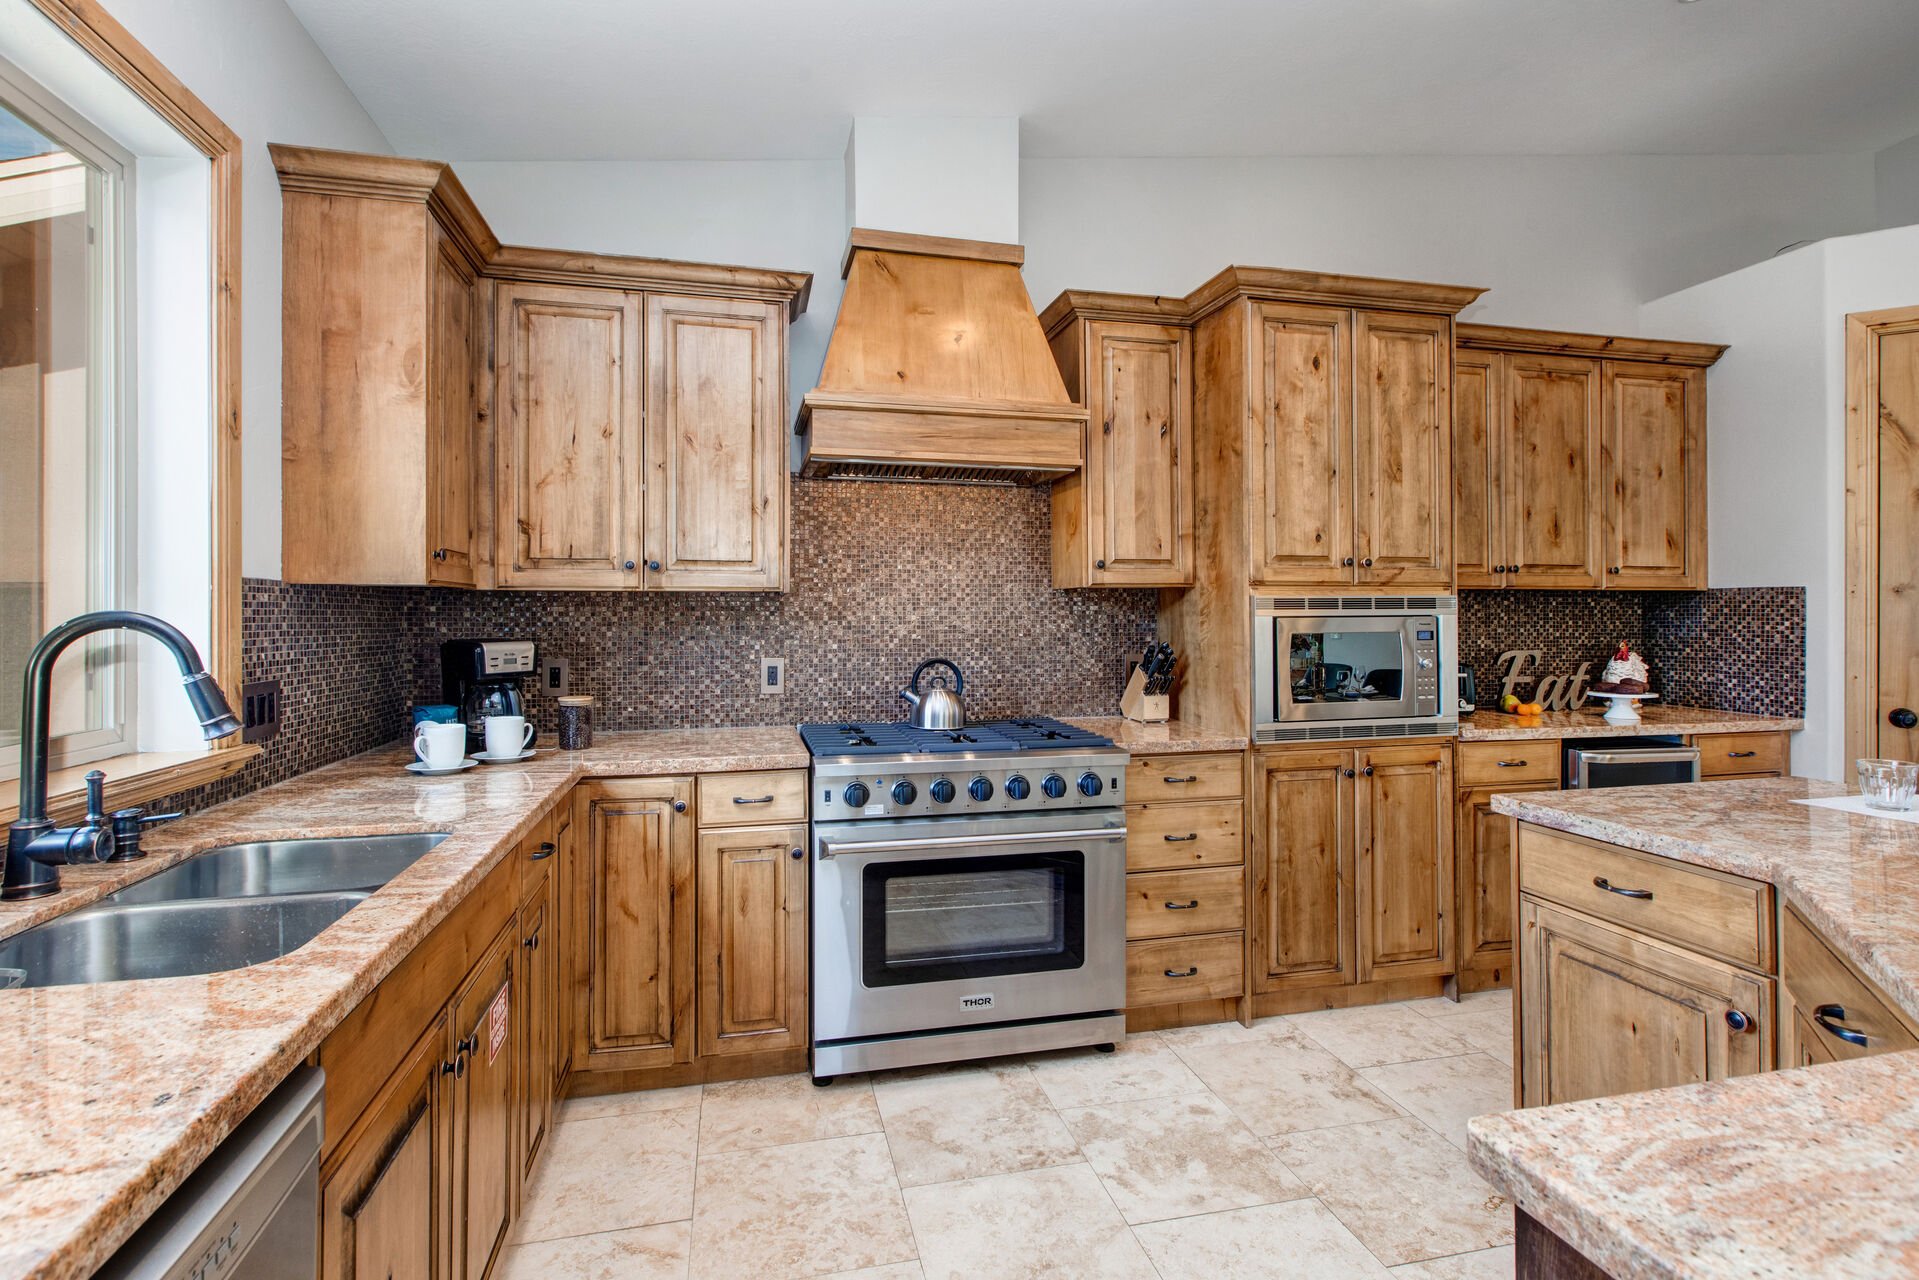 Spacious Kitchen with Plenty of Cabinets and Granite Counters